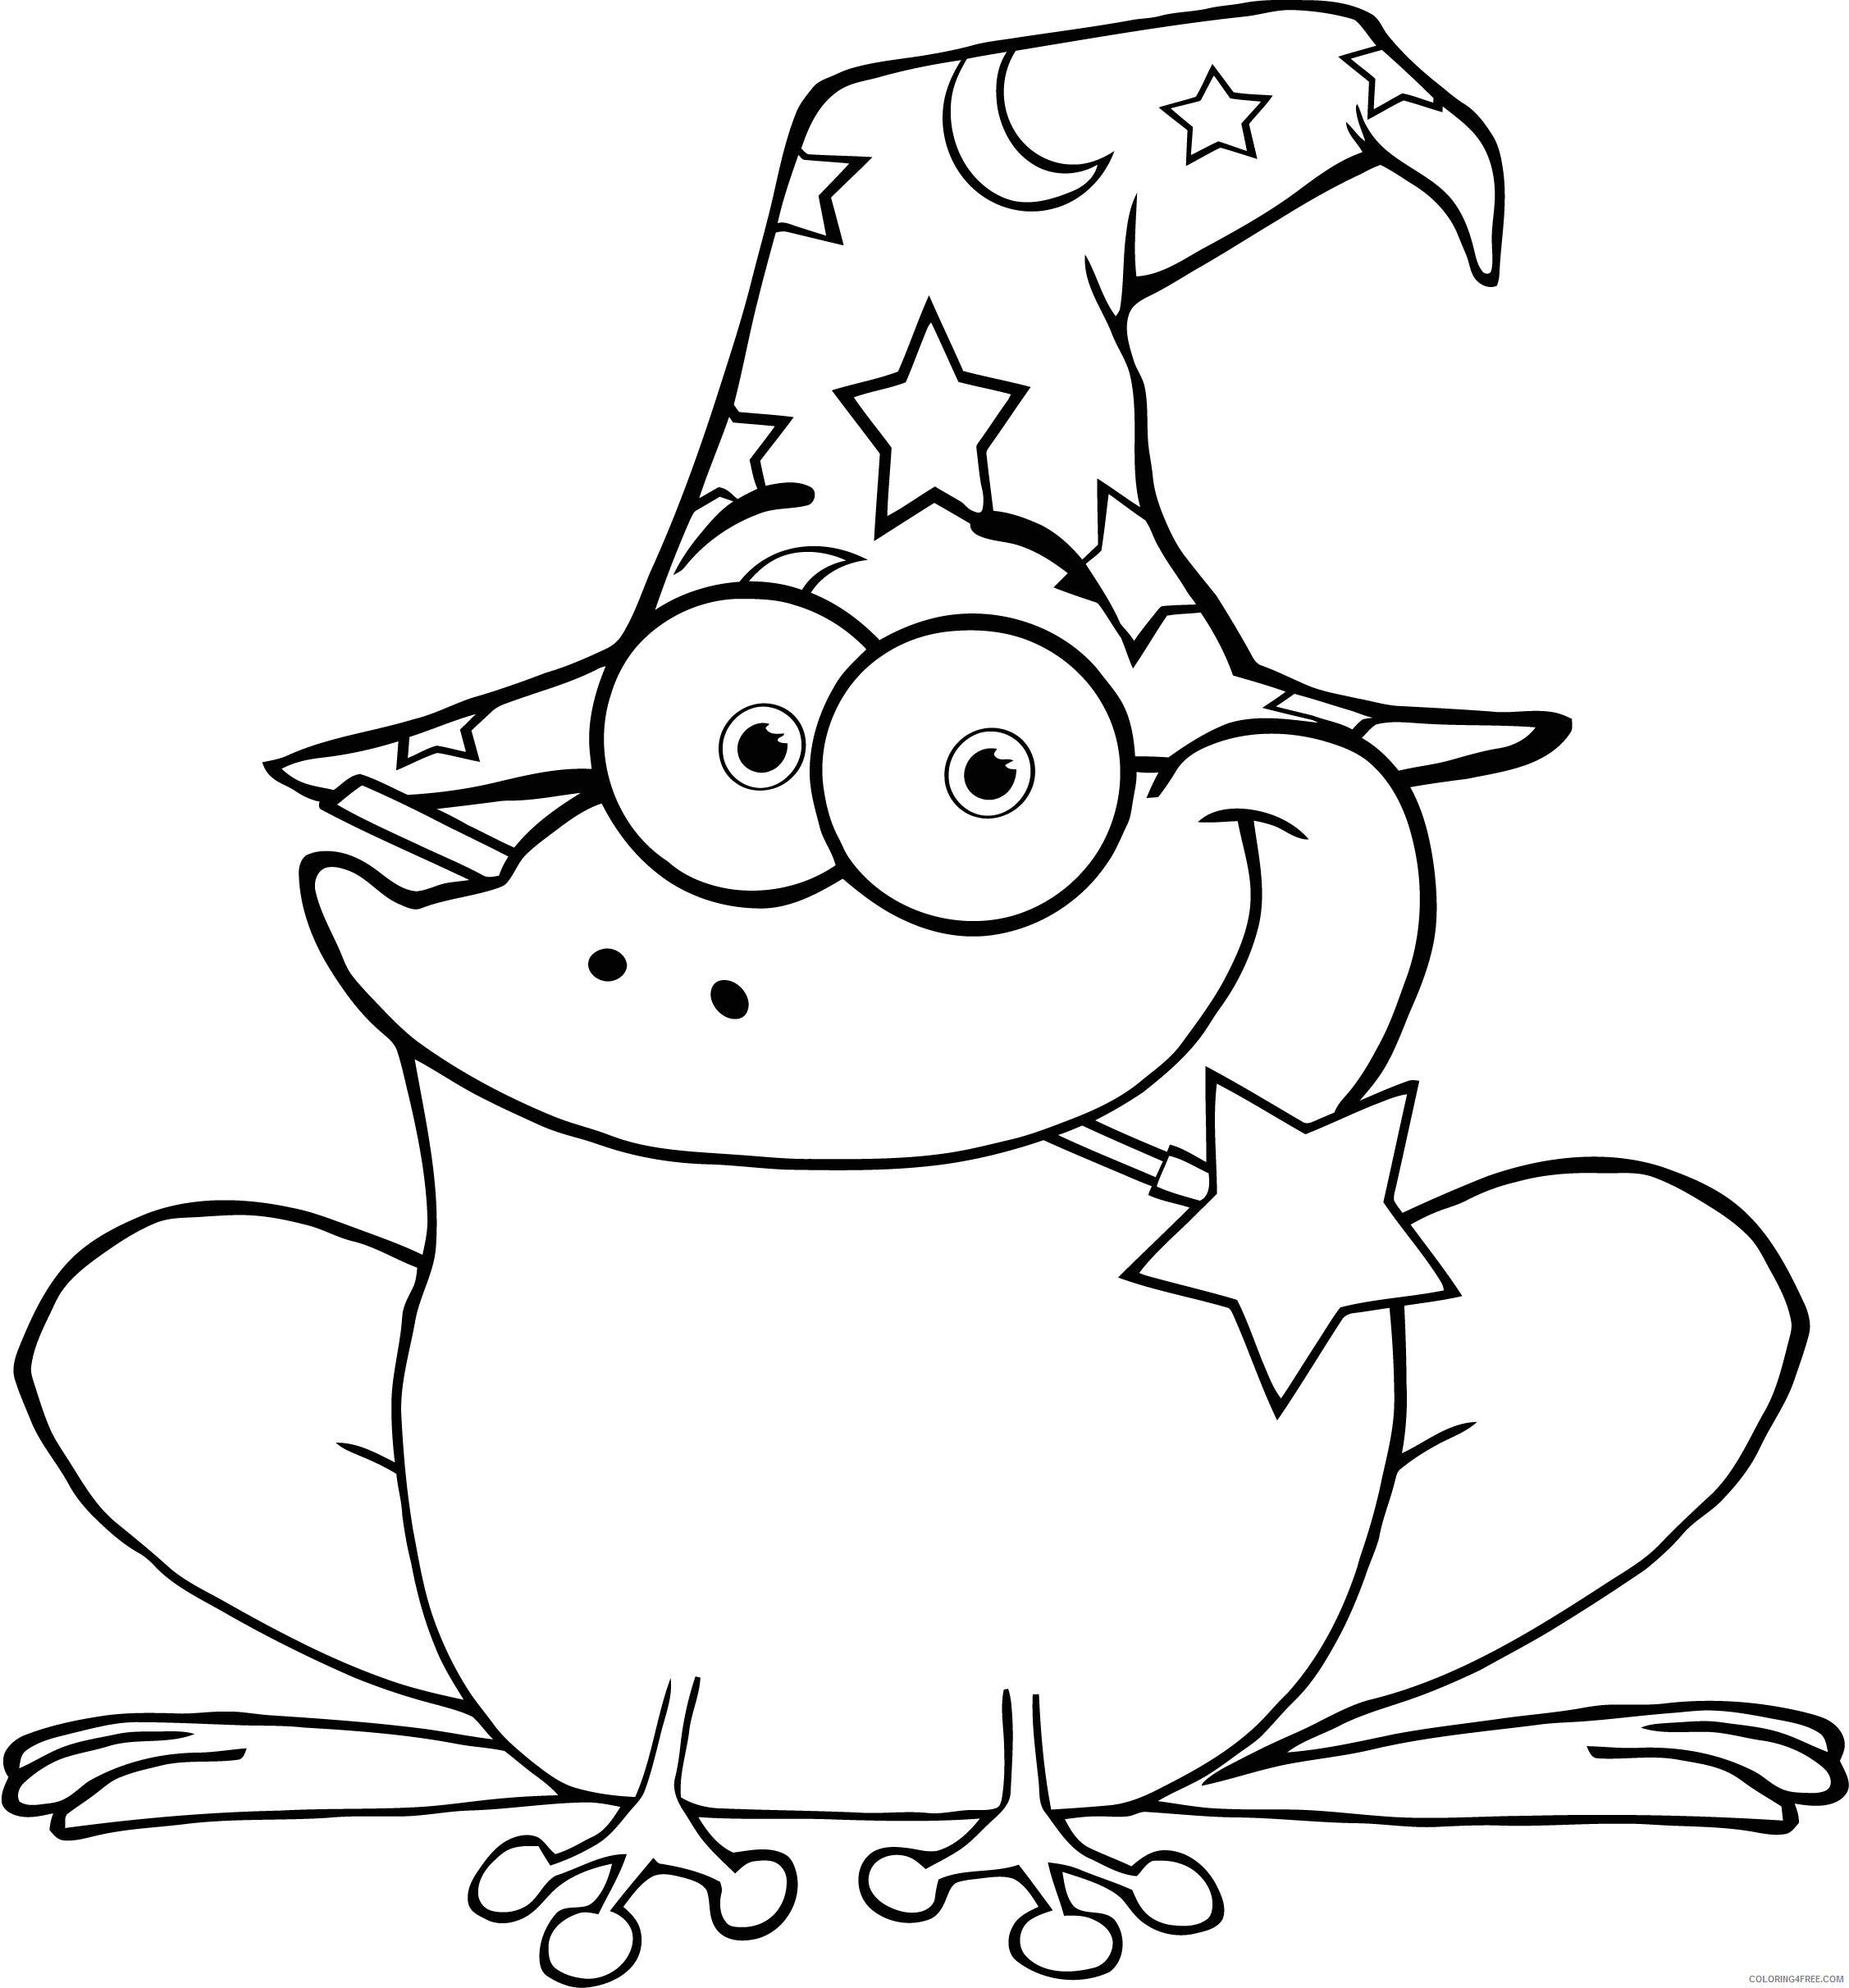 Frog Coloring Pages Animal Printable Sheets Cute Frog 2021 2276 Coloring4free